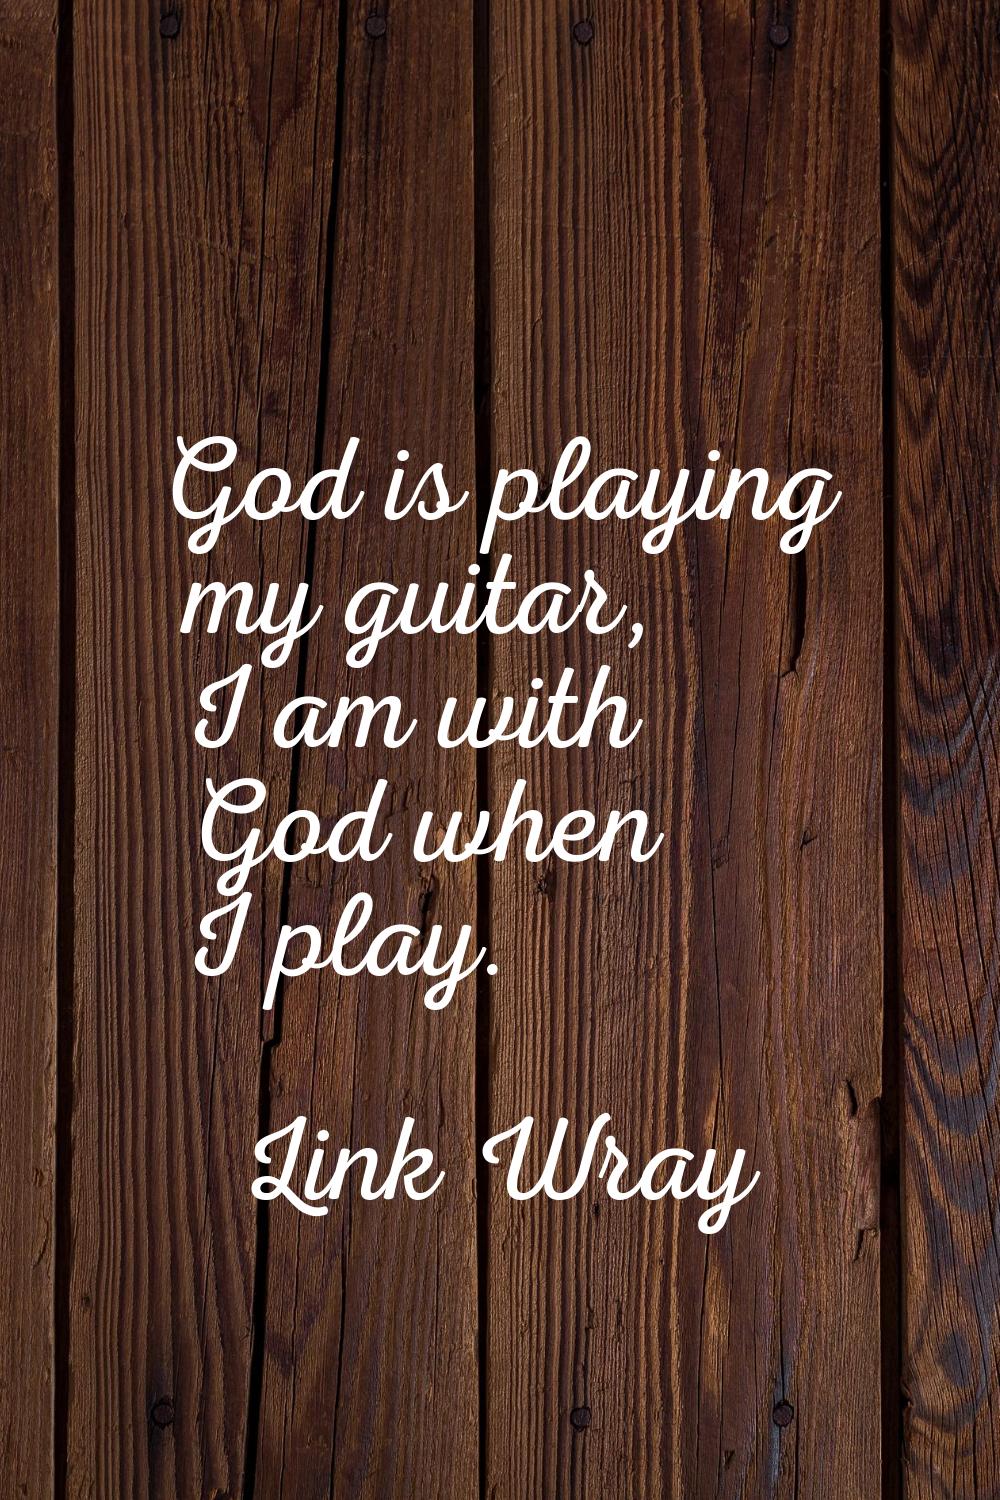 God is playing my guitar, I am with God when I play.